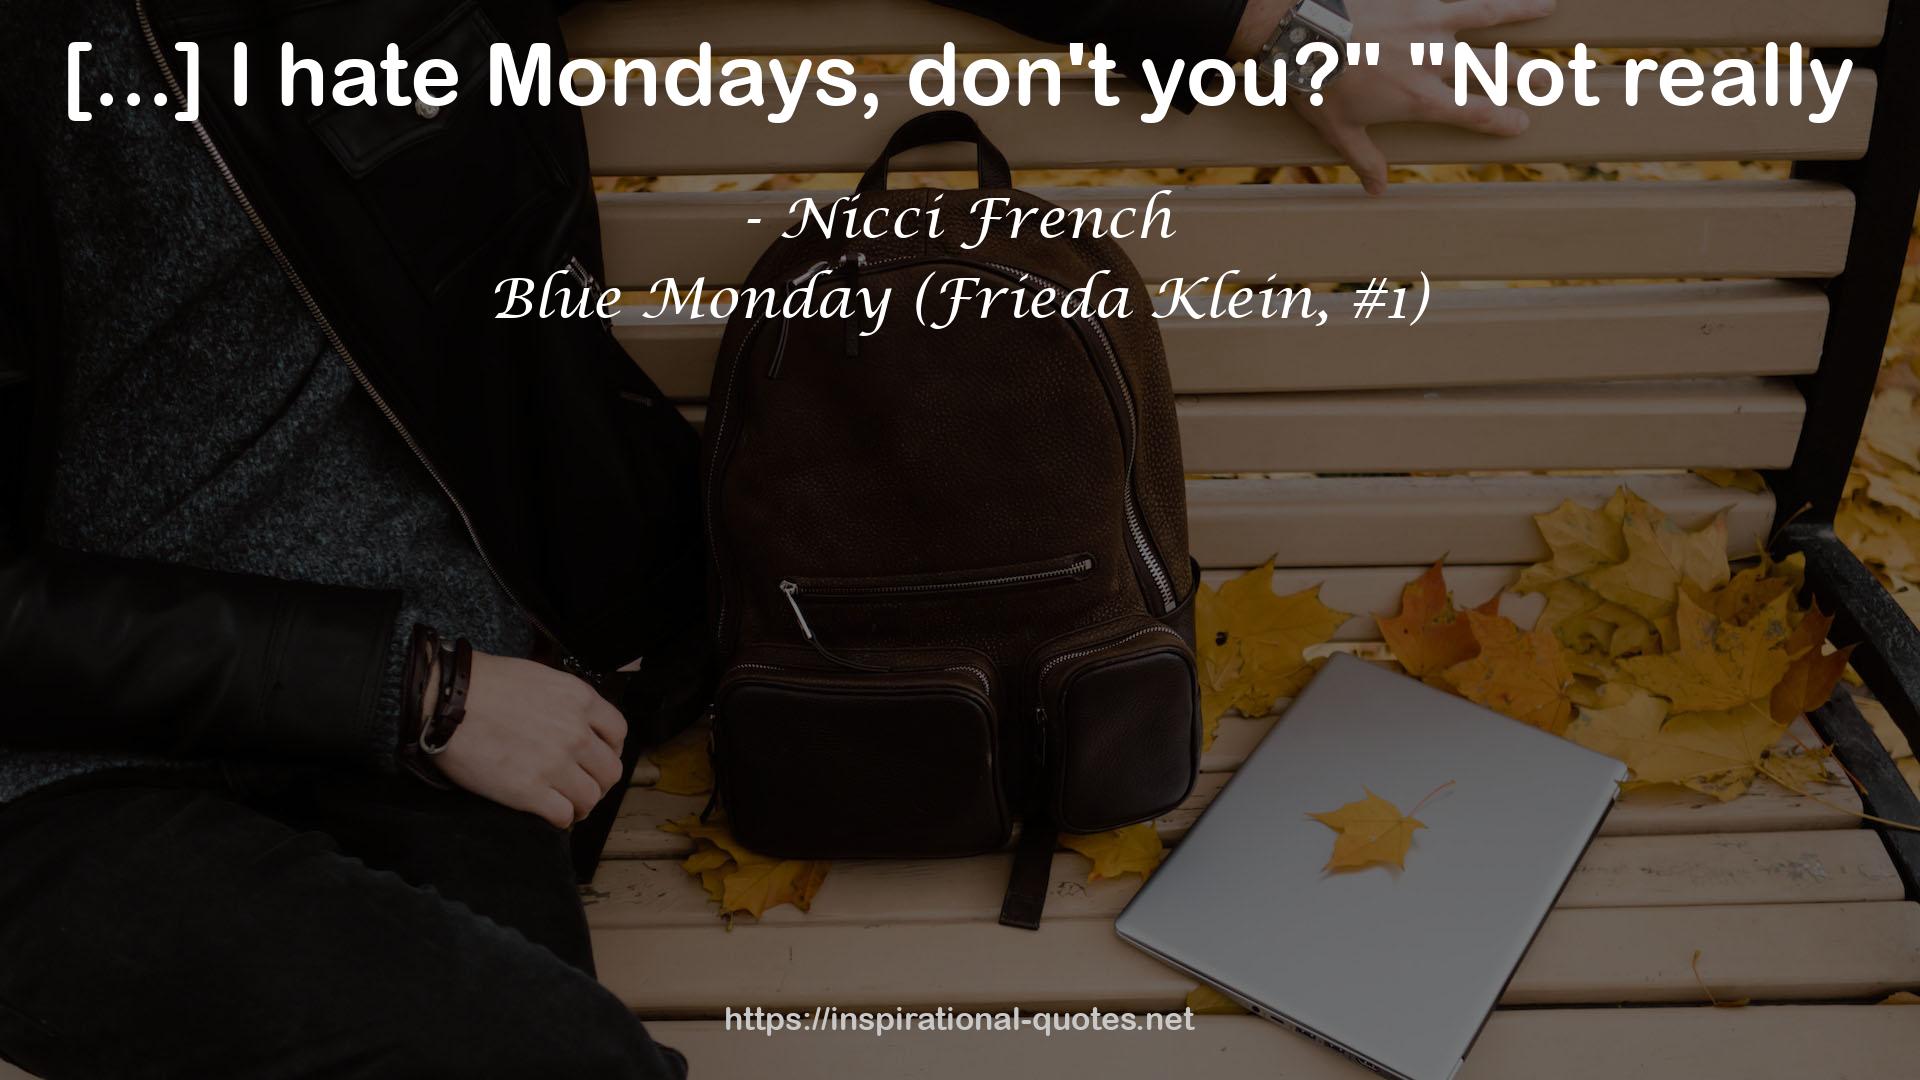 Nicci French QUOTES